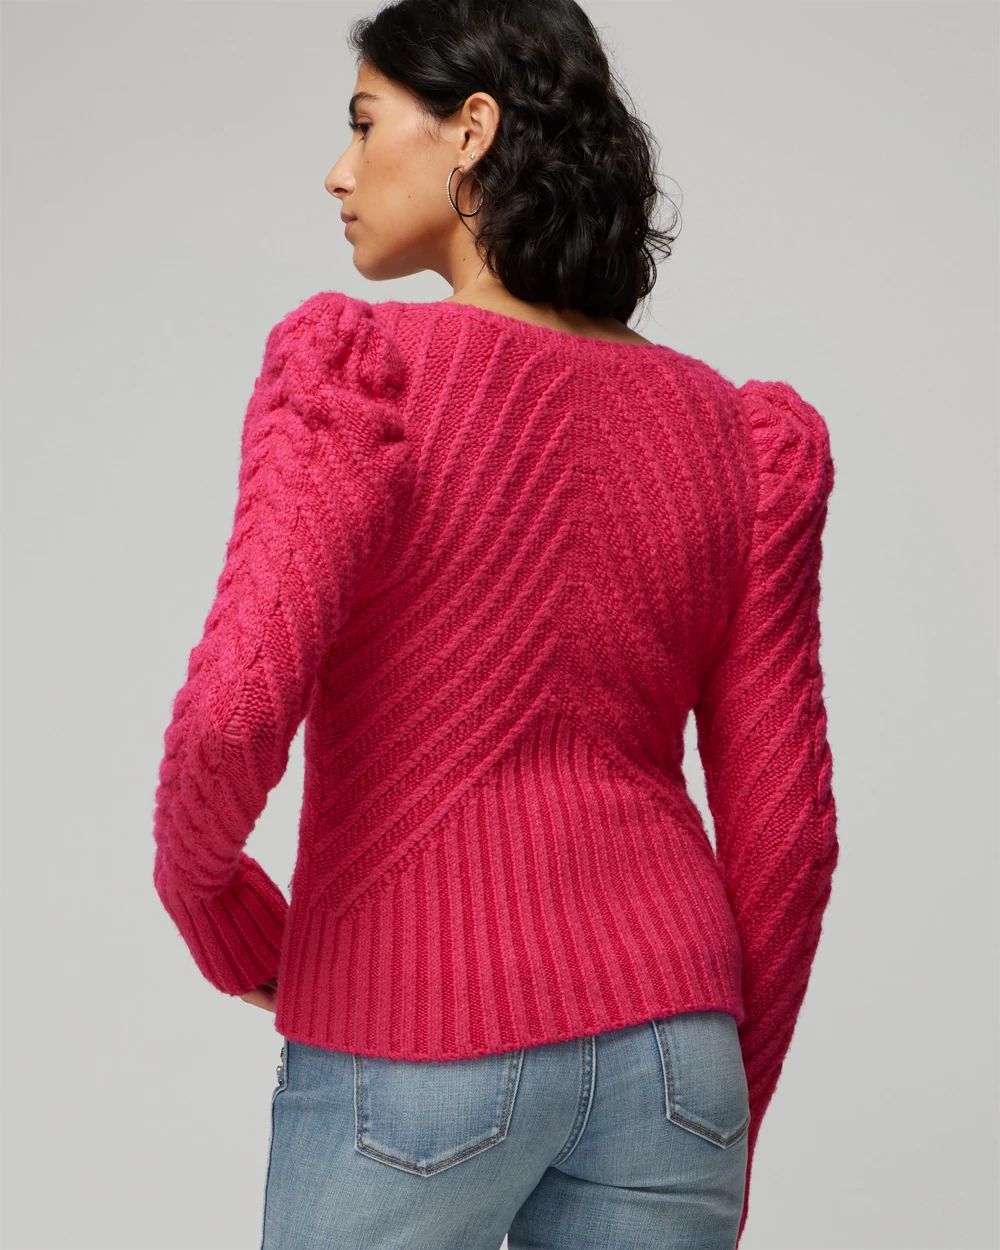 V-Neck Puff Sleeve Cable Pullover Sweater click to view larger image.